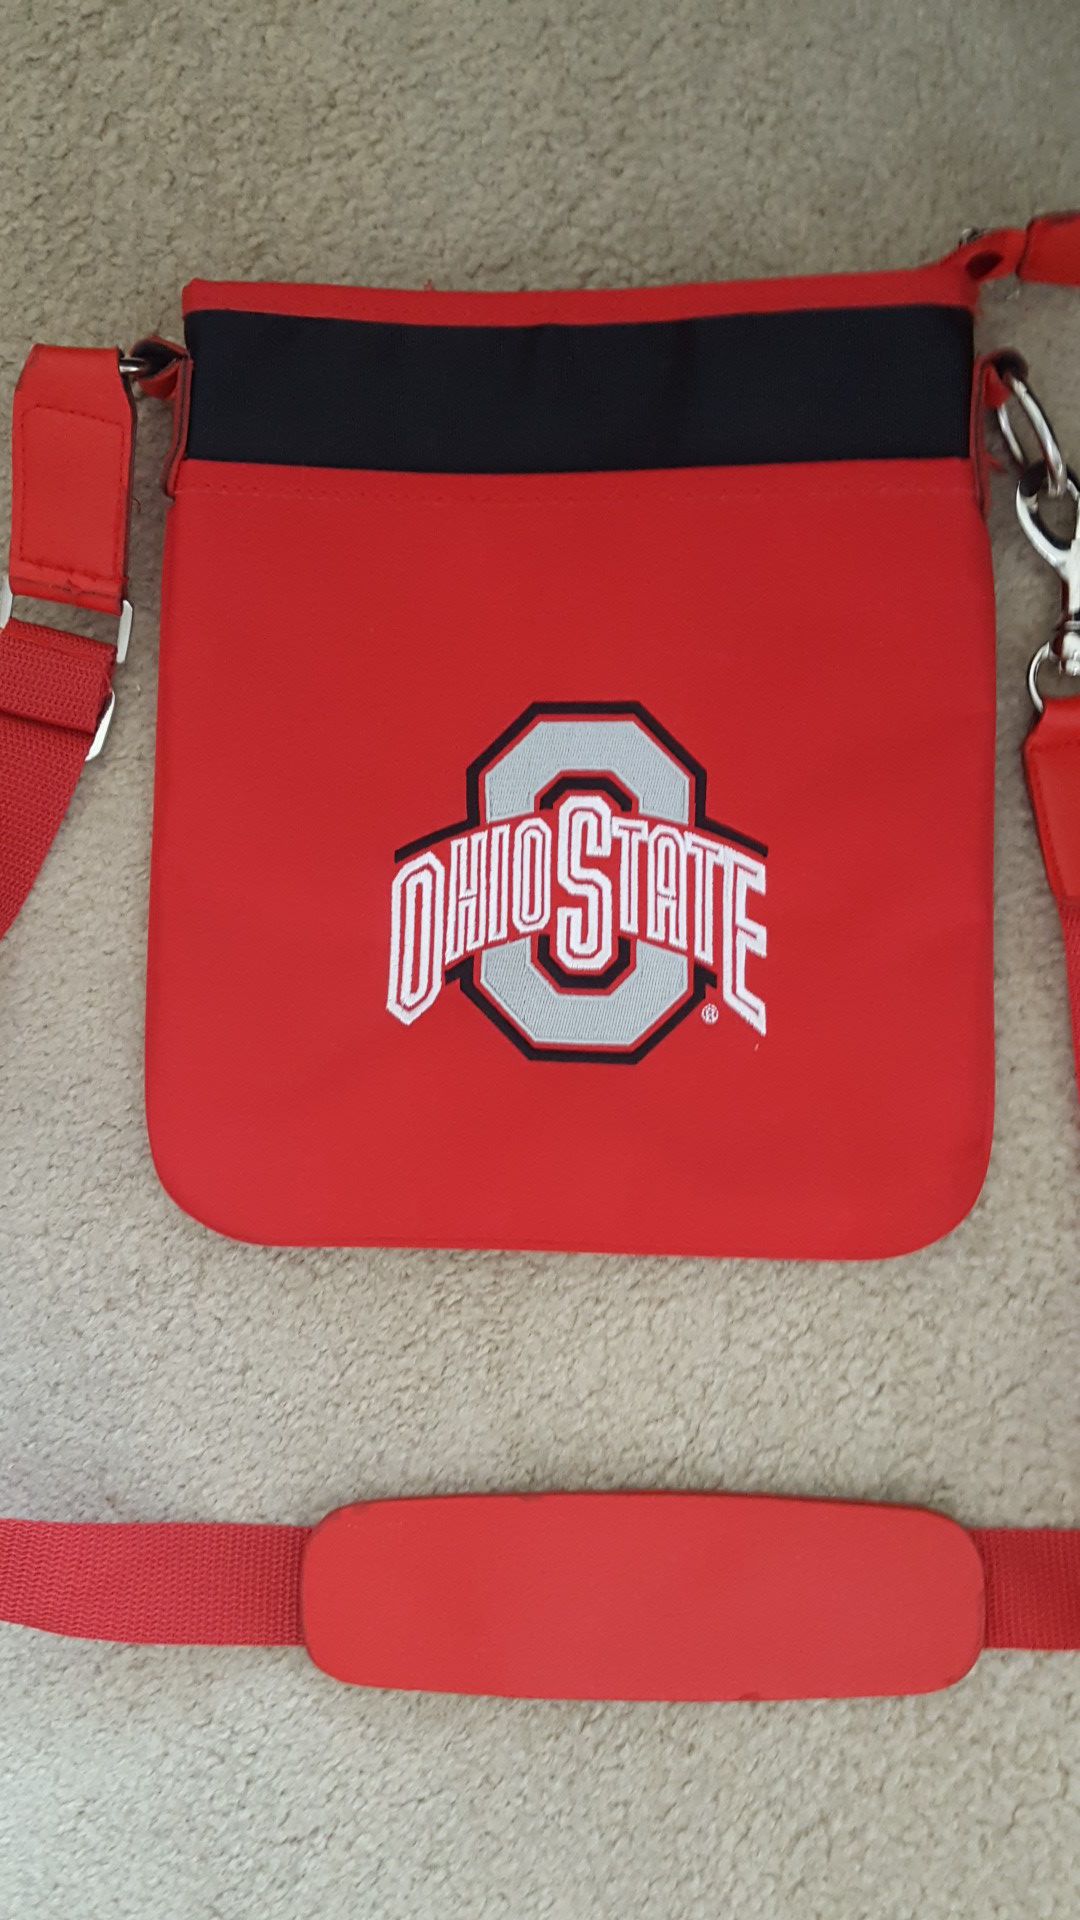 OSU Ohio State Nylon Embroidered Cross Body Purse/Bag. Adjustable strap with heavy duty latch. Inside zipper pocket as well as 2 smaller pockets.